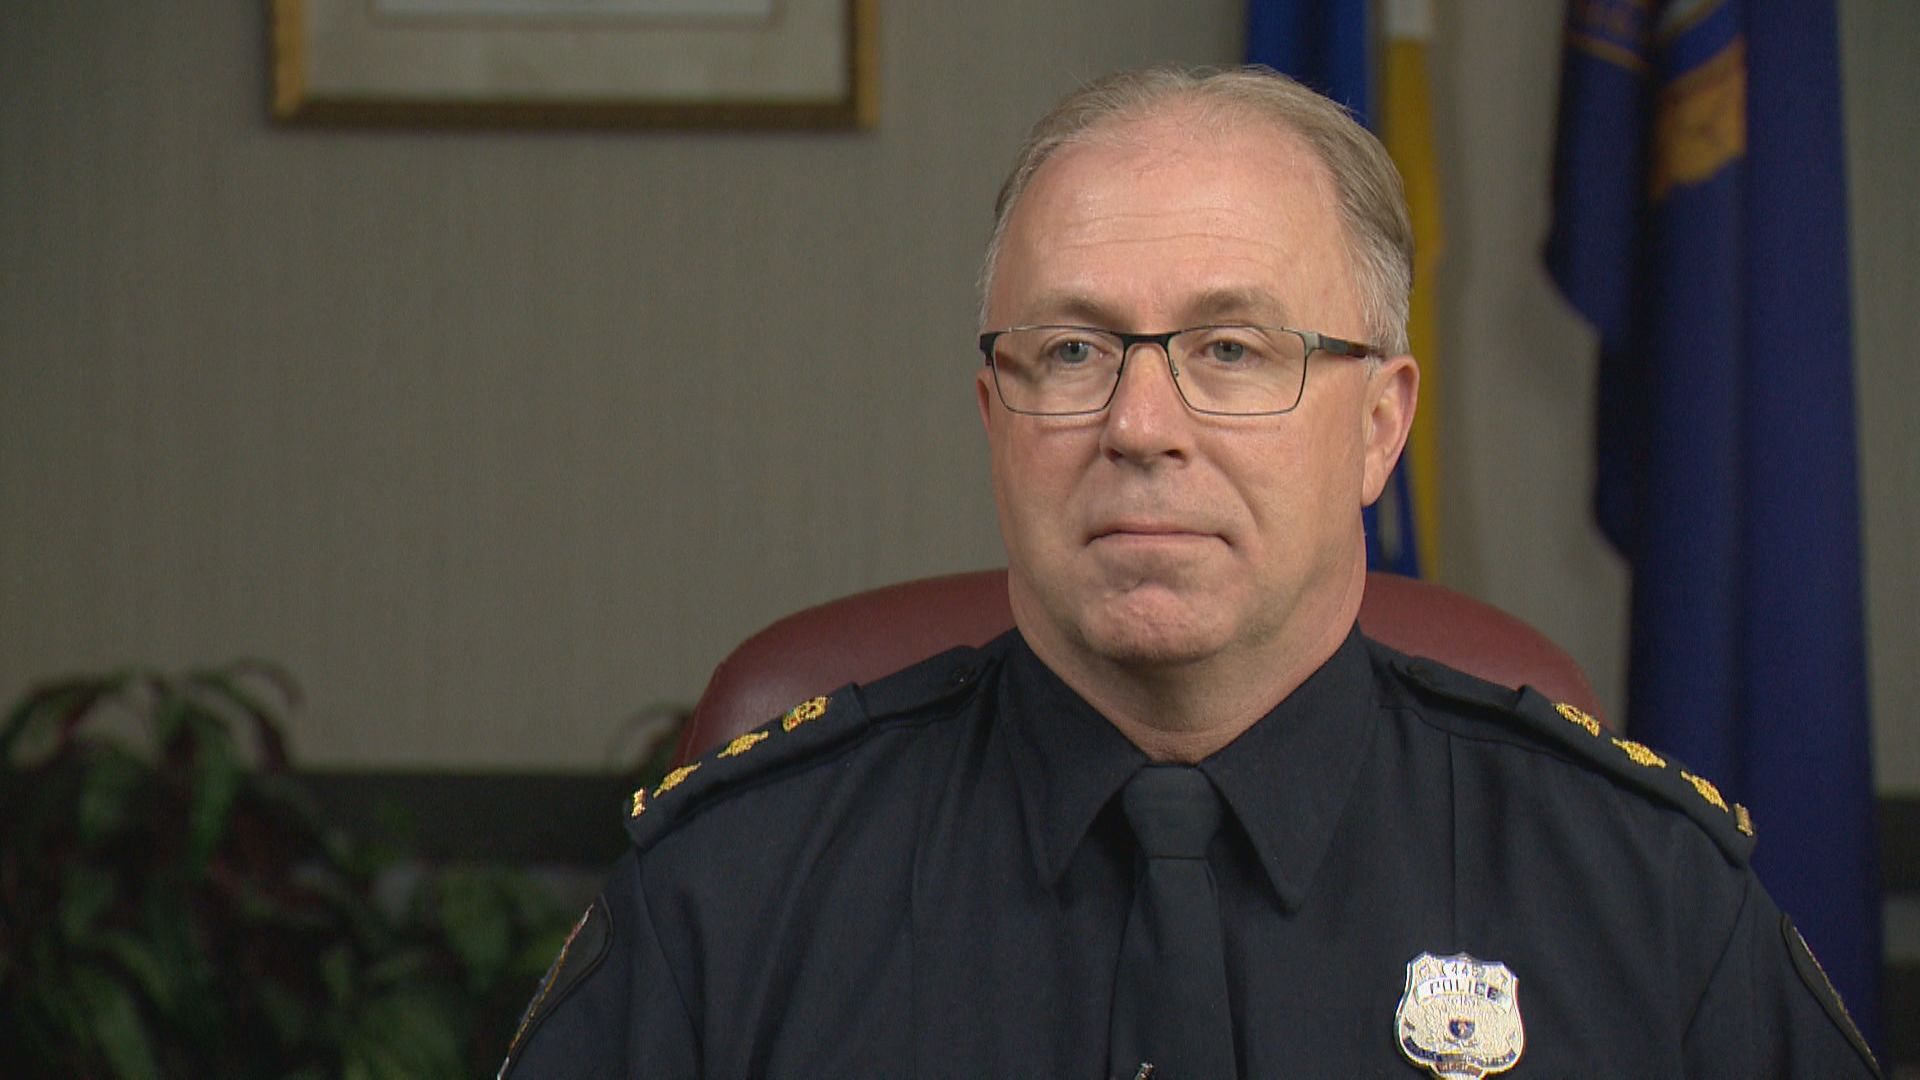 ‘It was just time’: Regina deputy police chief to retire